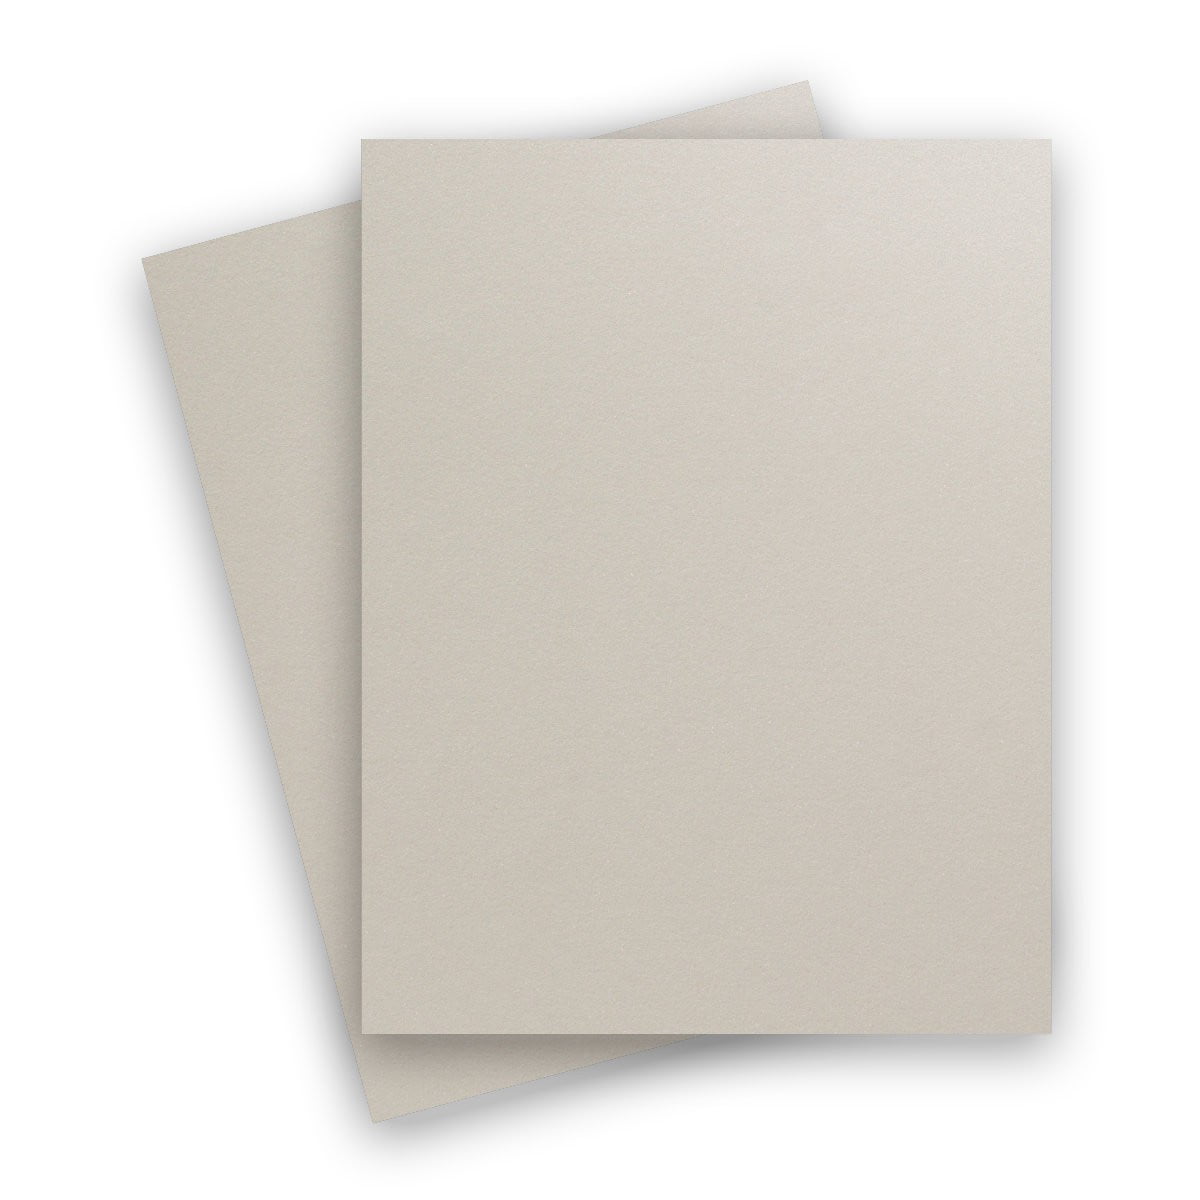 Shimmer Pure White Pearl 8-1/2-x-14 Lightweight Multi-use Paper 200-pk Crafters and DIY Projects Designers PaperPapers LEGAL size Everyday Paper 118 GSM 32/80lb Text Professionals